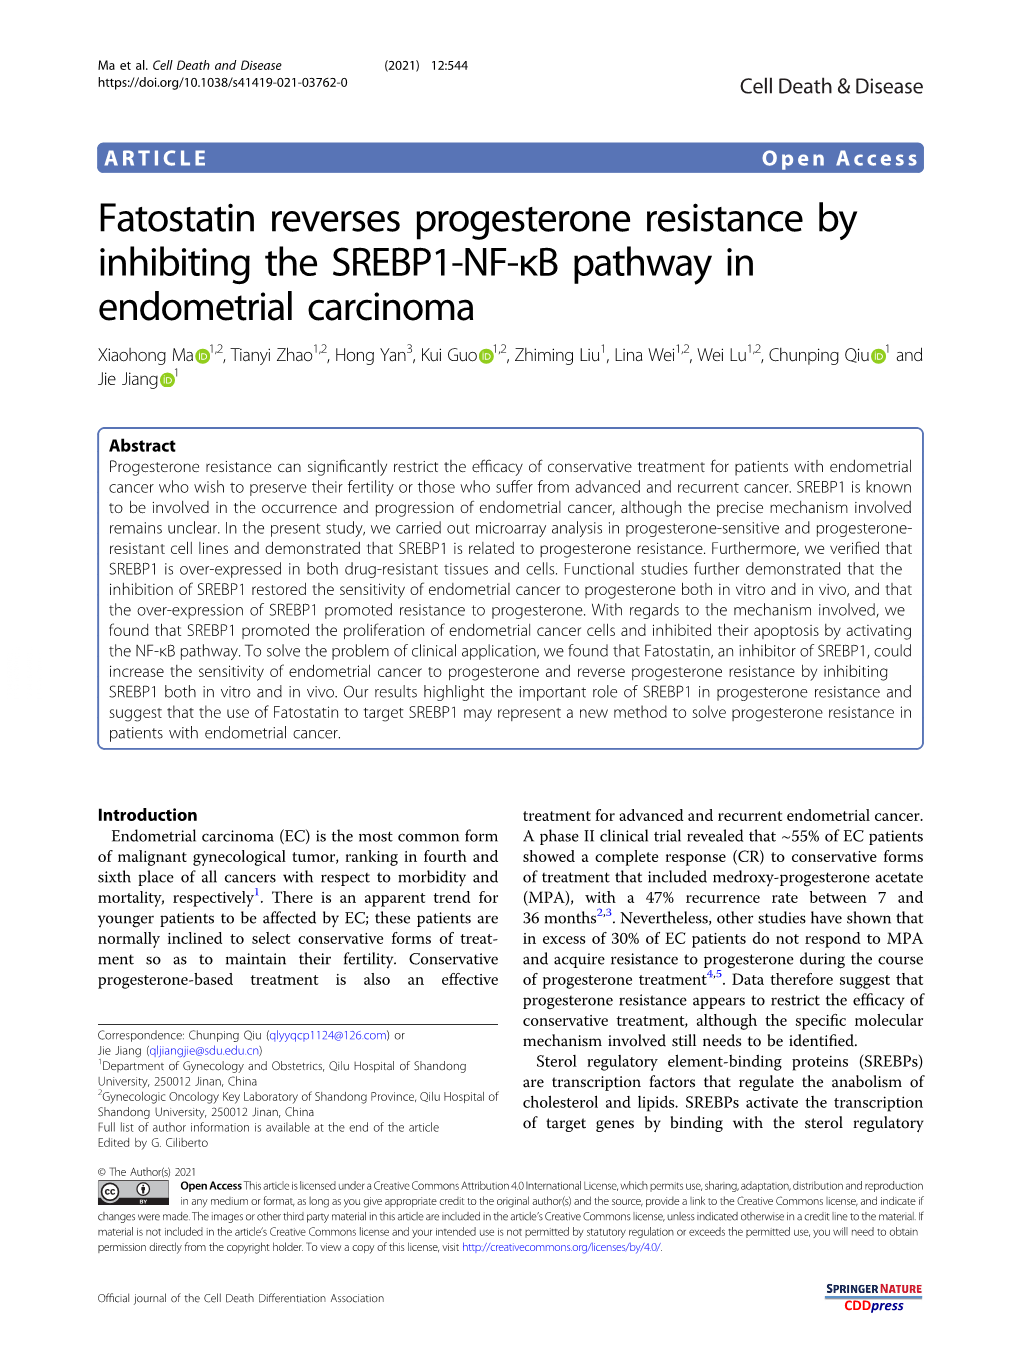 Fatostatin Reverses Progesterone Resistance by Inhibiting The